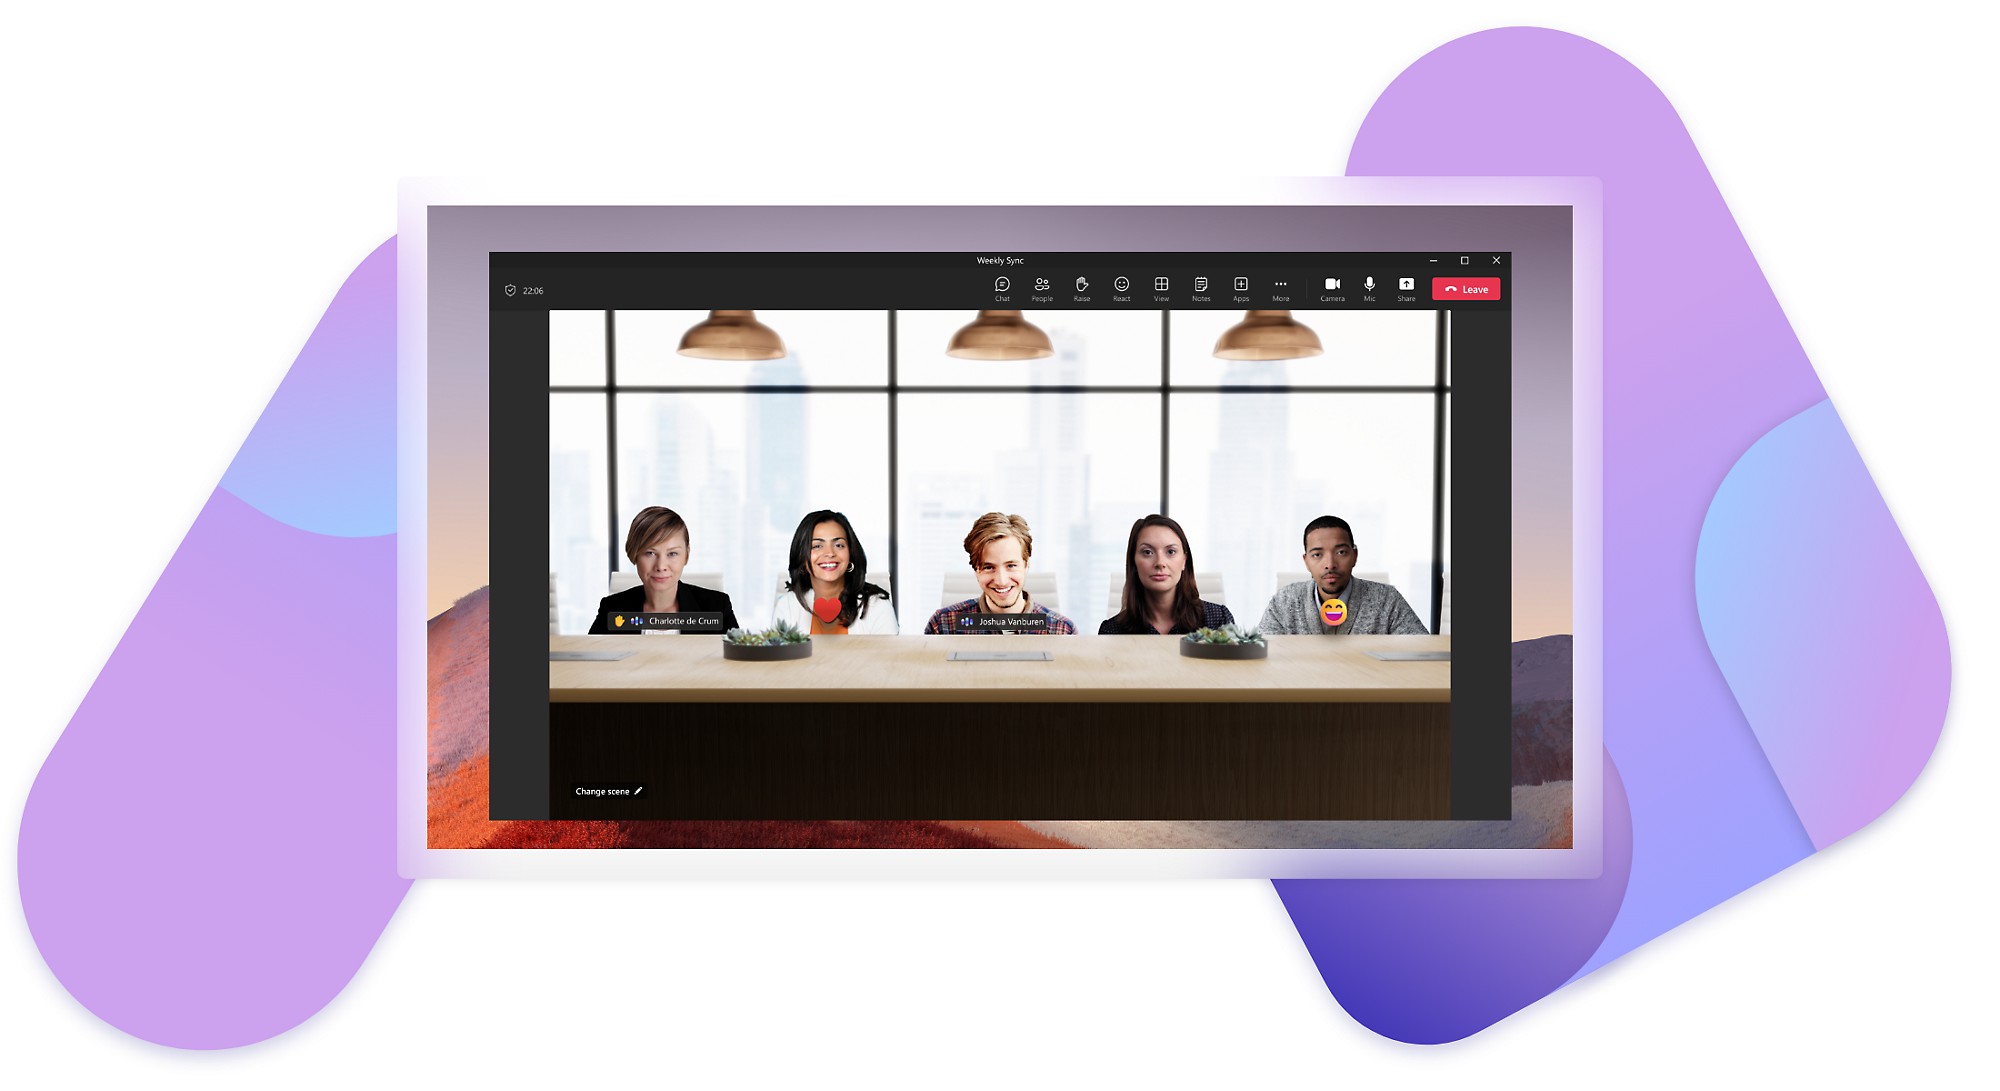 A Teams video call in Together mode showing all members of the call in one room at a table together.